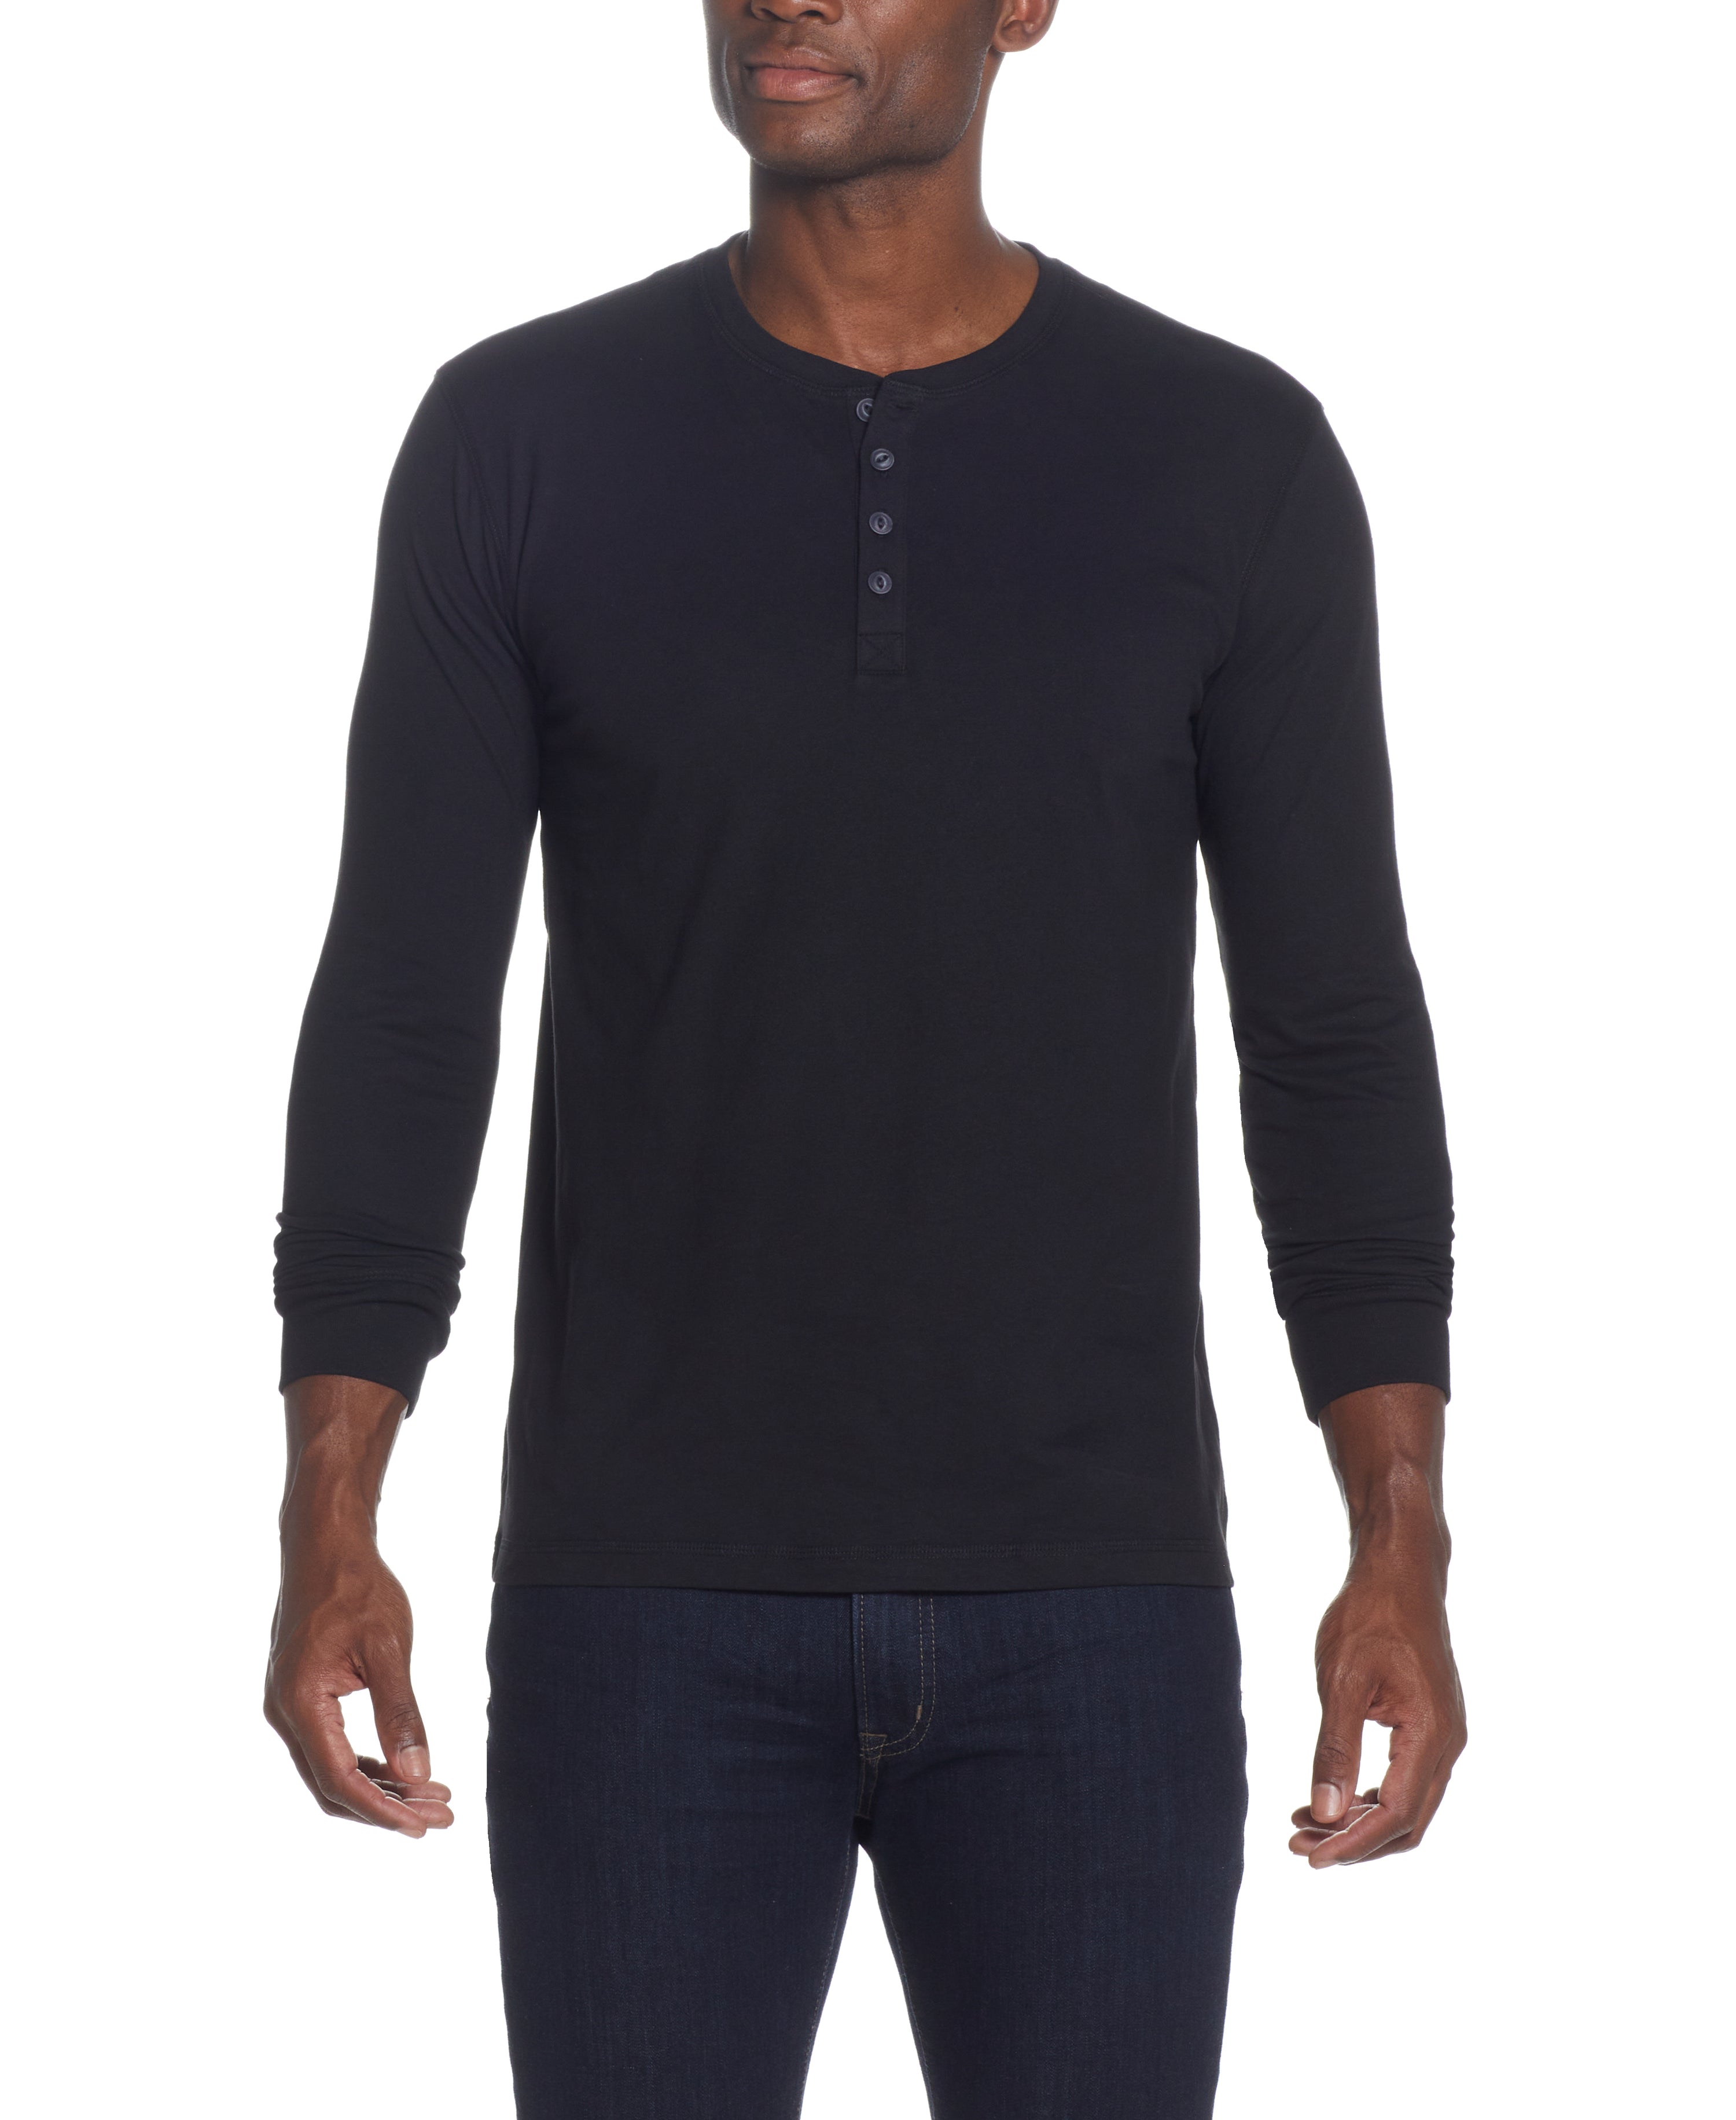 LONG SLEEVE BRUSHED JERSEY HENLEY in BLACK